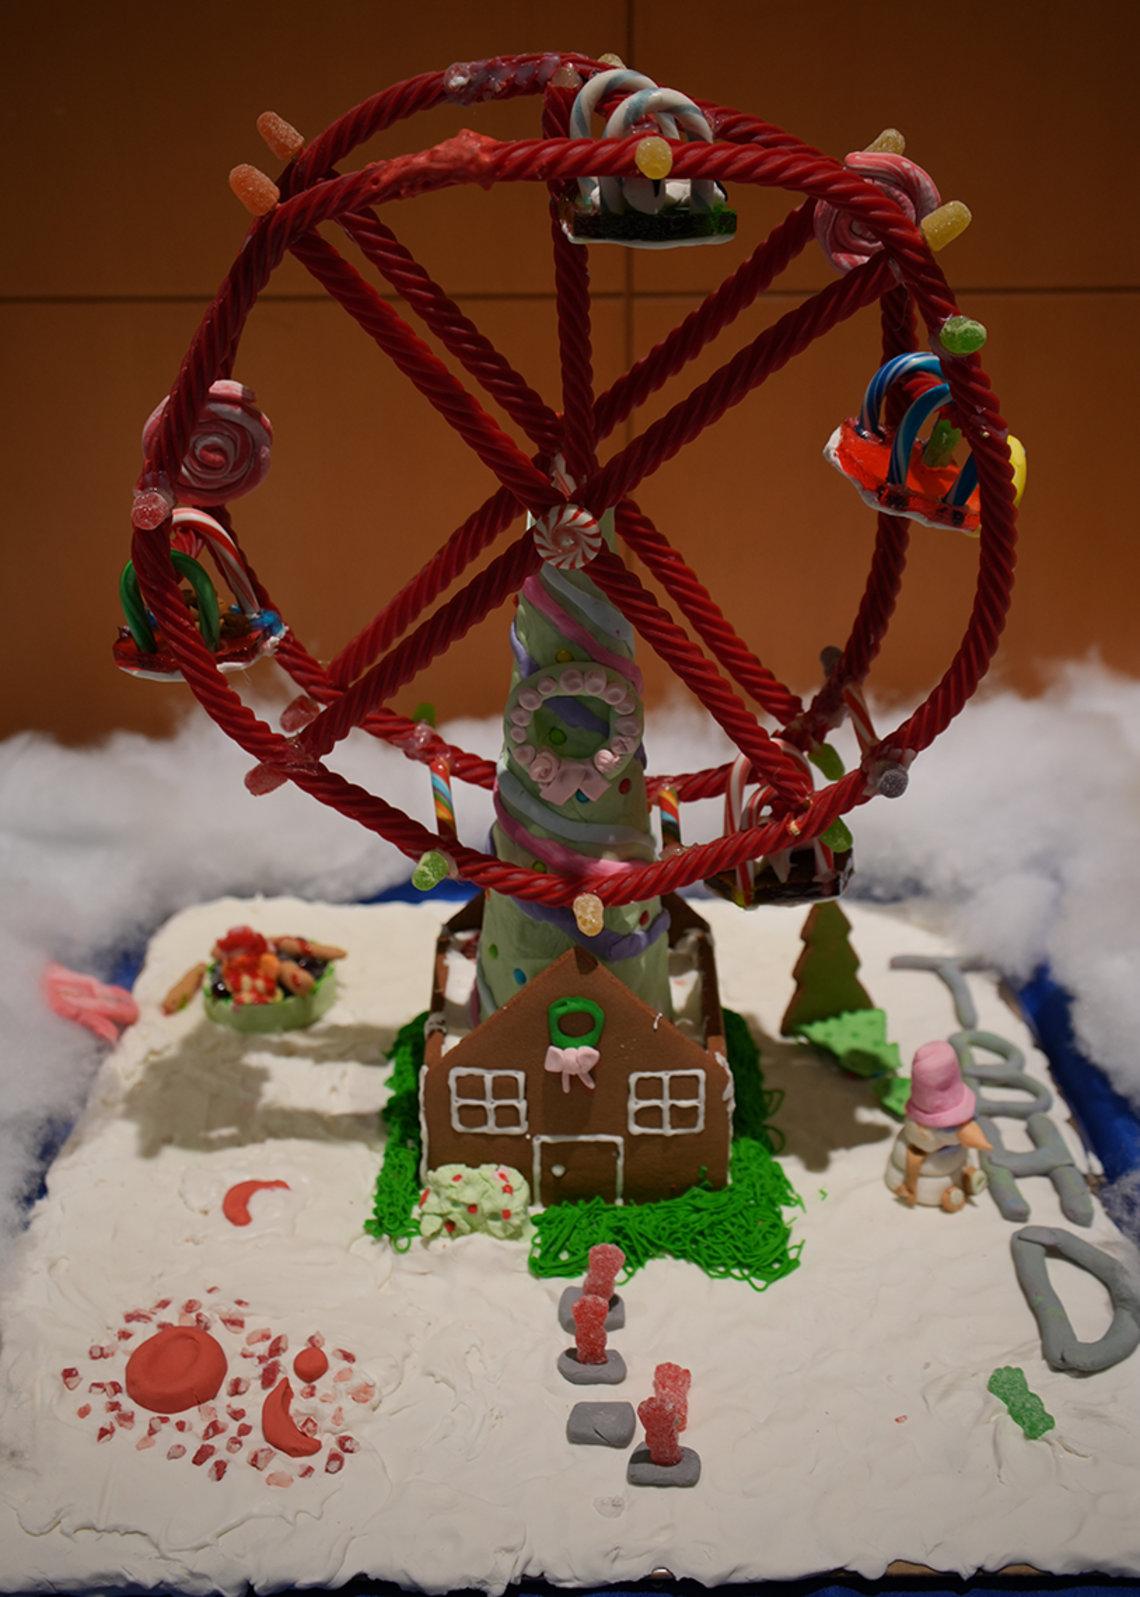 Gingerbread house with a large ferris wheel atop made from red licorice